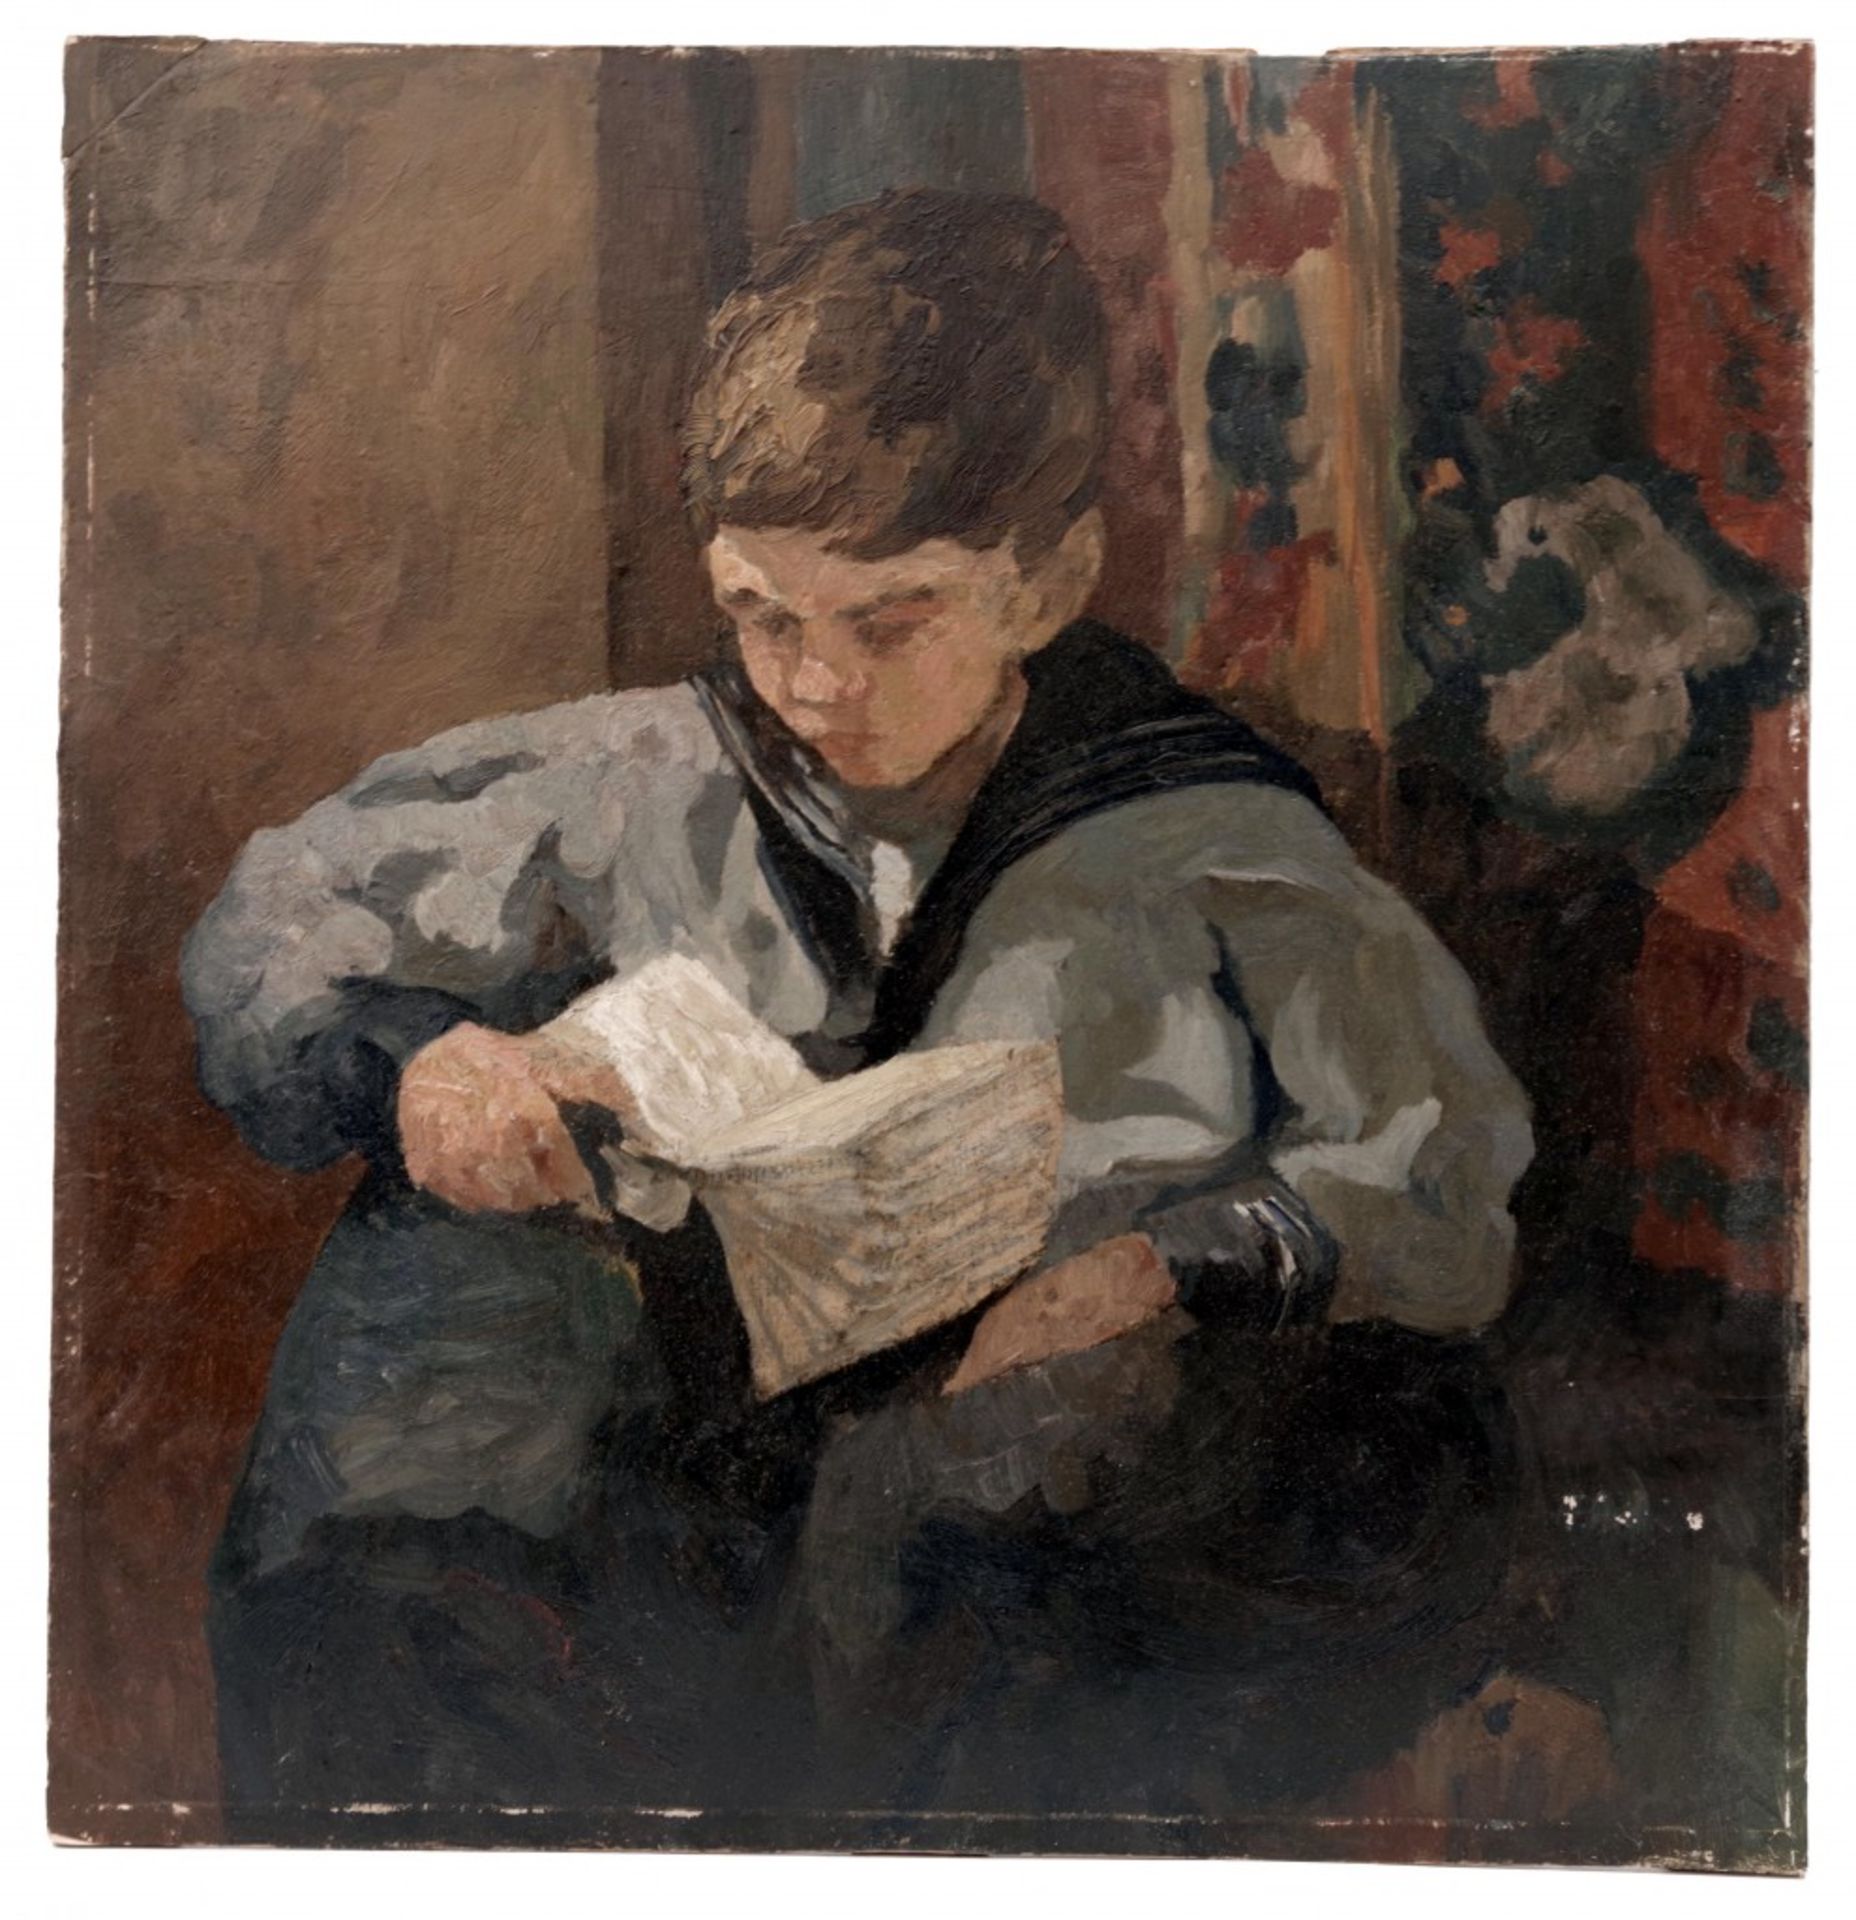 Portrait of a Boy with a Book